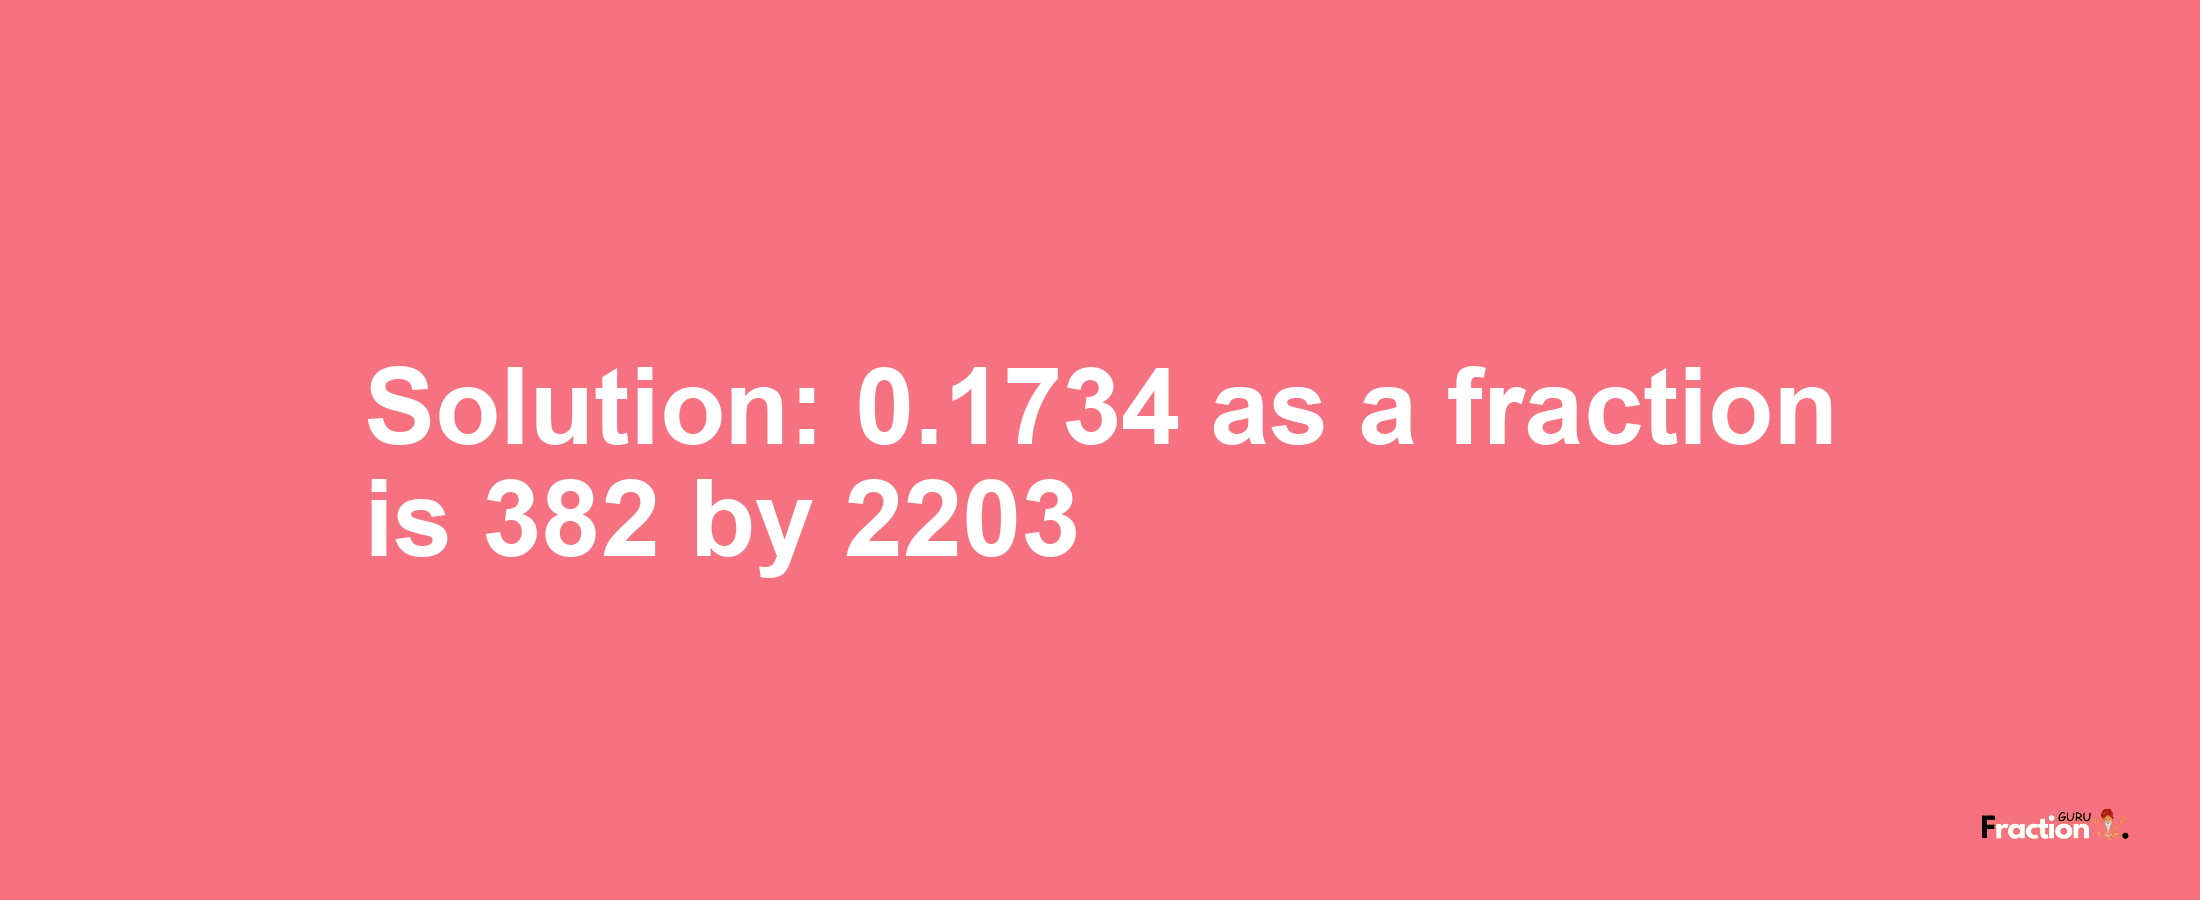 Solution:0.1734 as a fraction is 382/2203